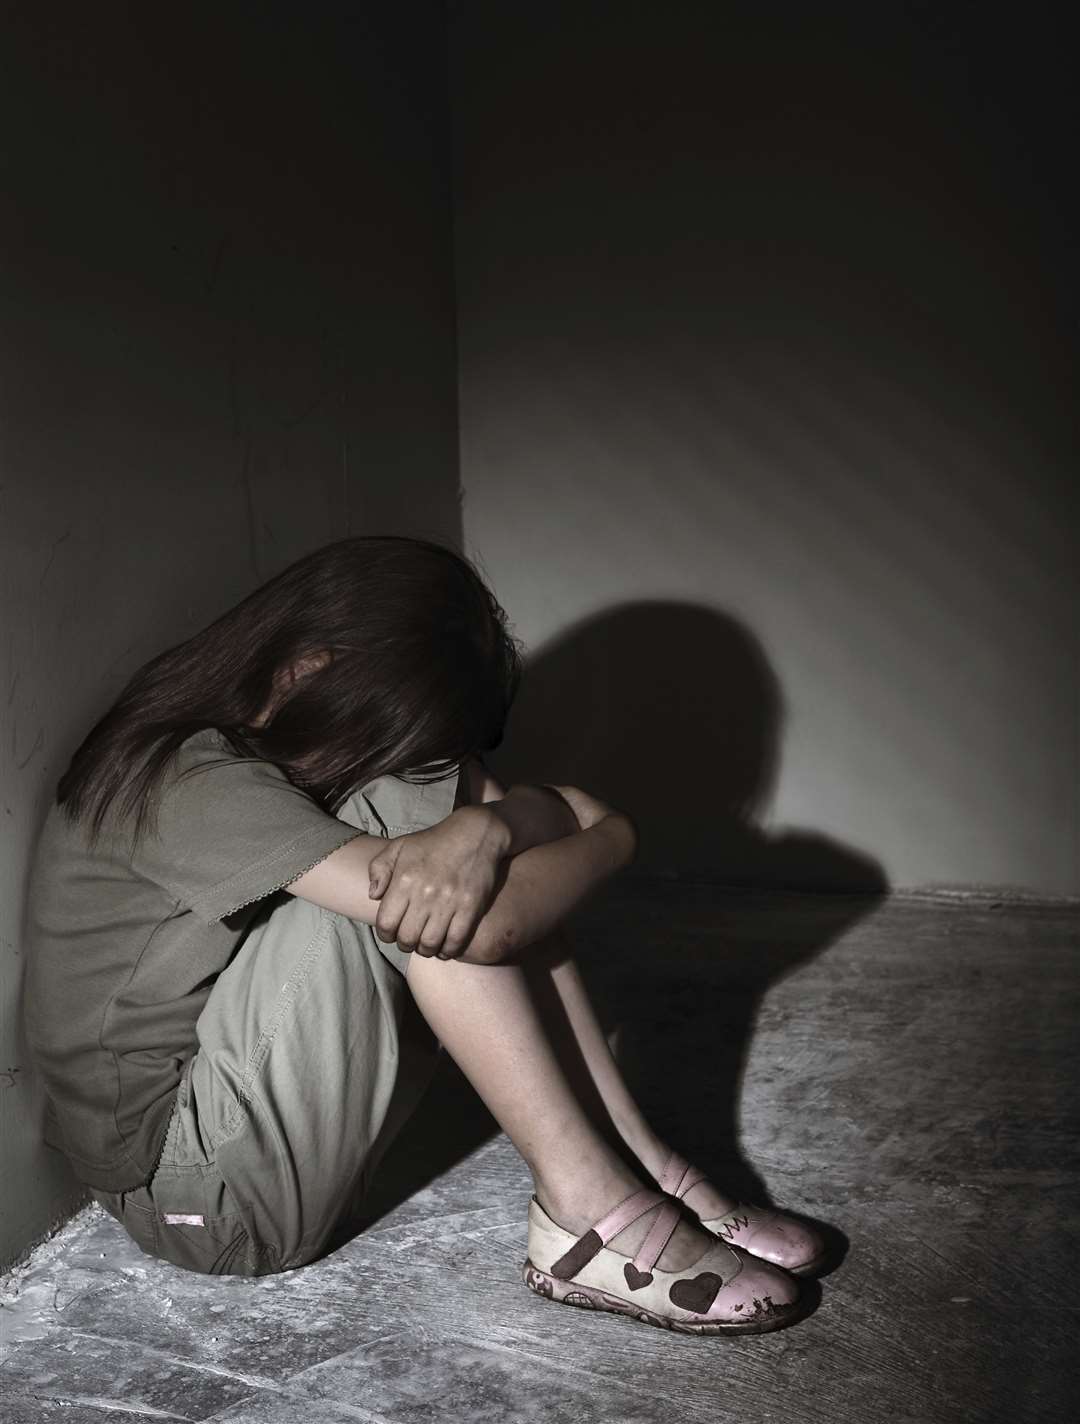 The woman was abused as a child. Stock image: Thinkstock Image Library